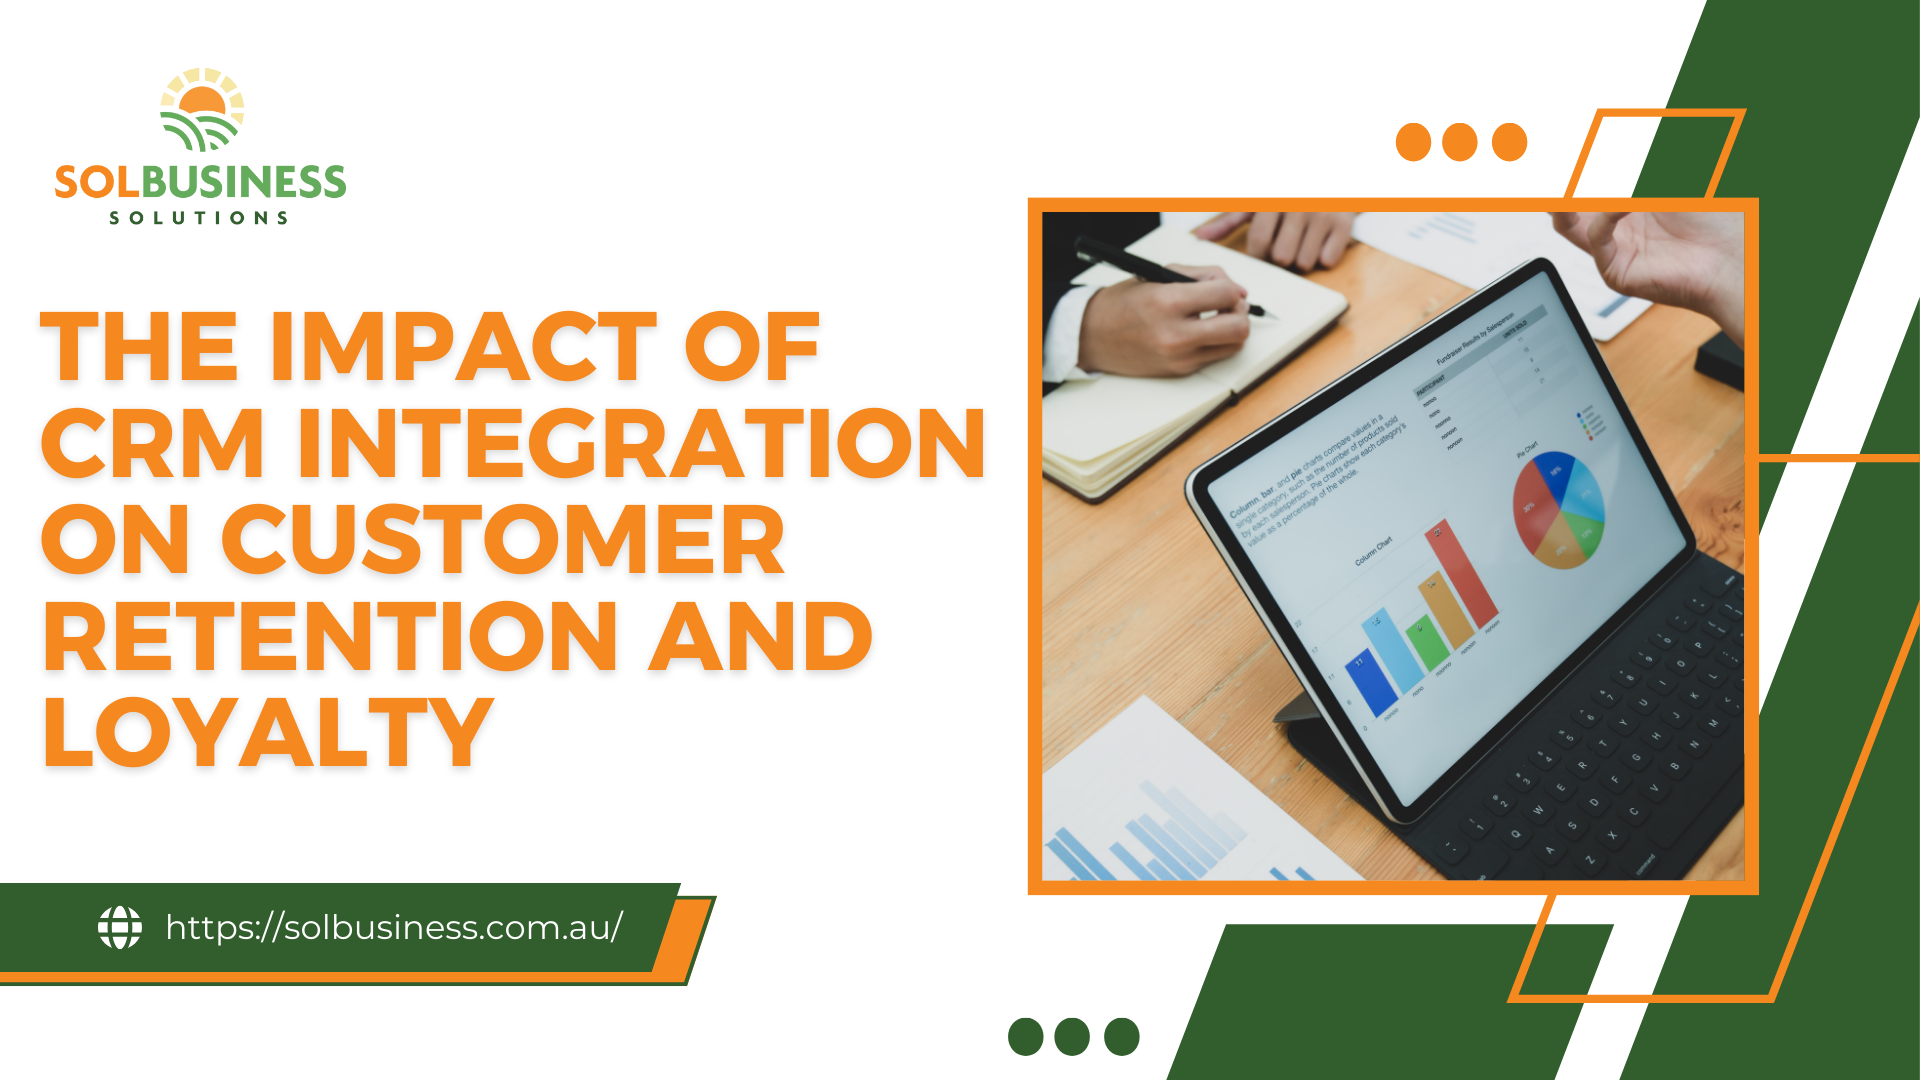 The Impact of CRM Integration on Customer Retention and Loyalty